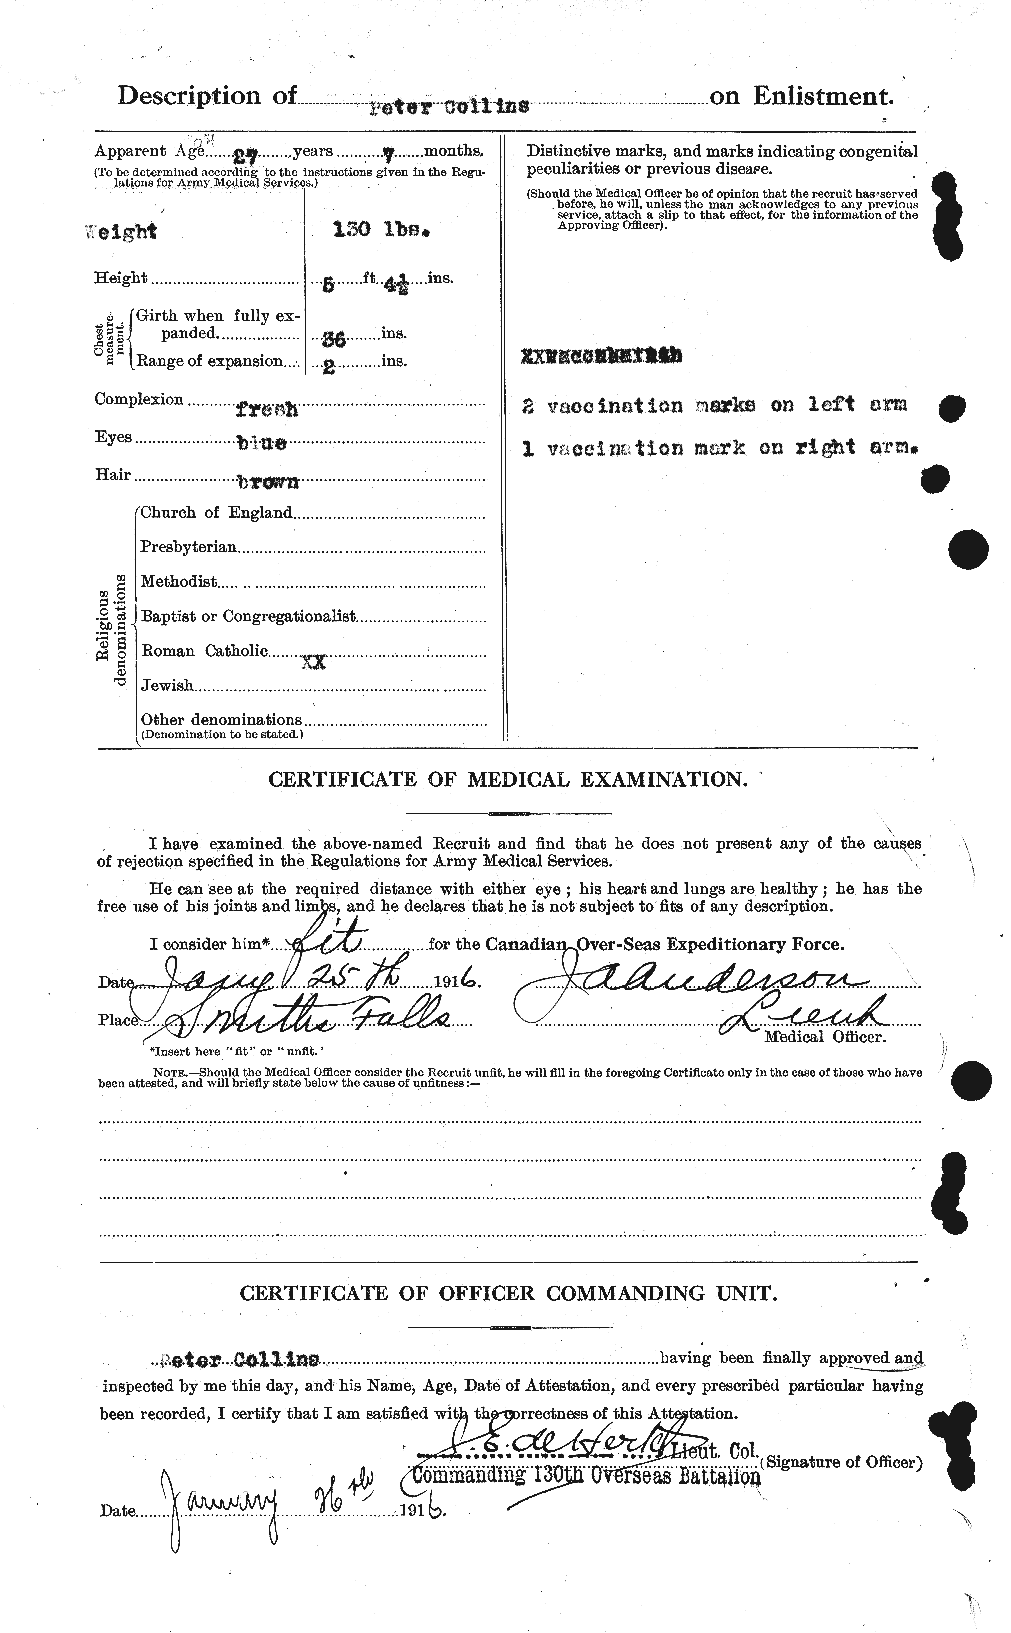 Personnel Records of the First World War - CEF 069293b